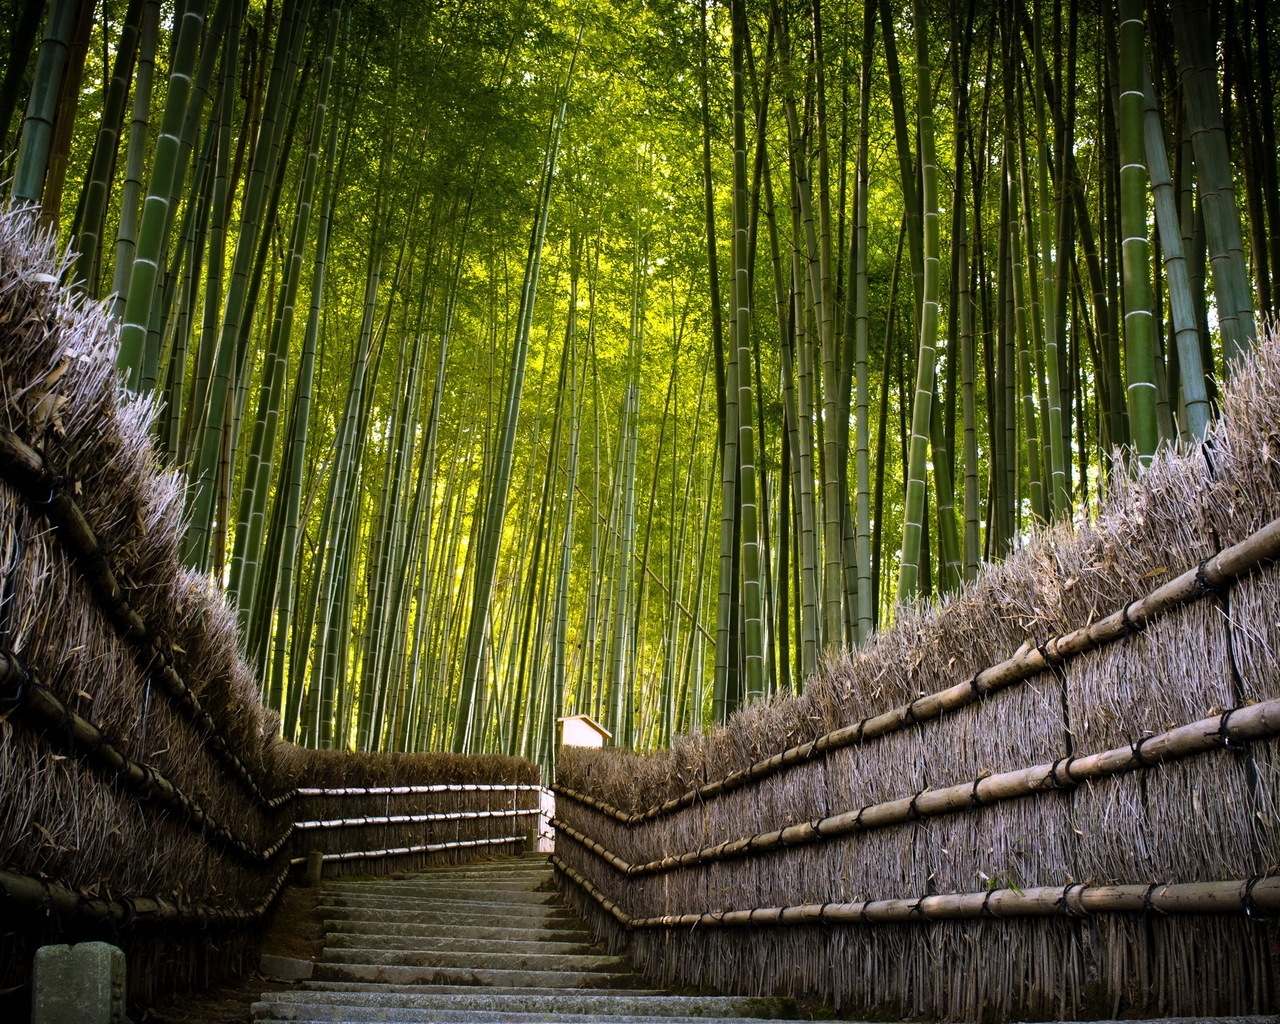 Bamboo Fence for 1280 x 1024 resolution